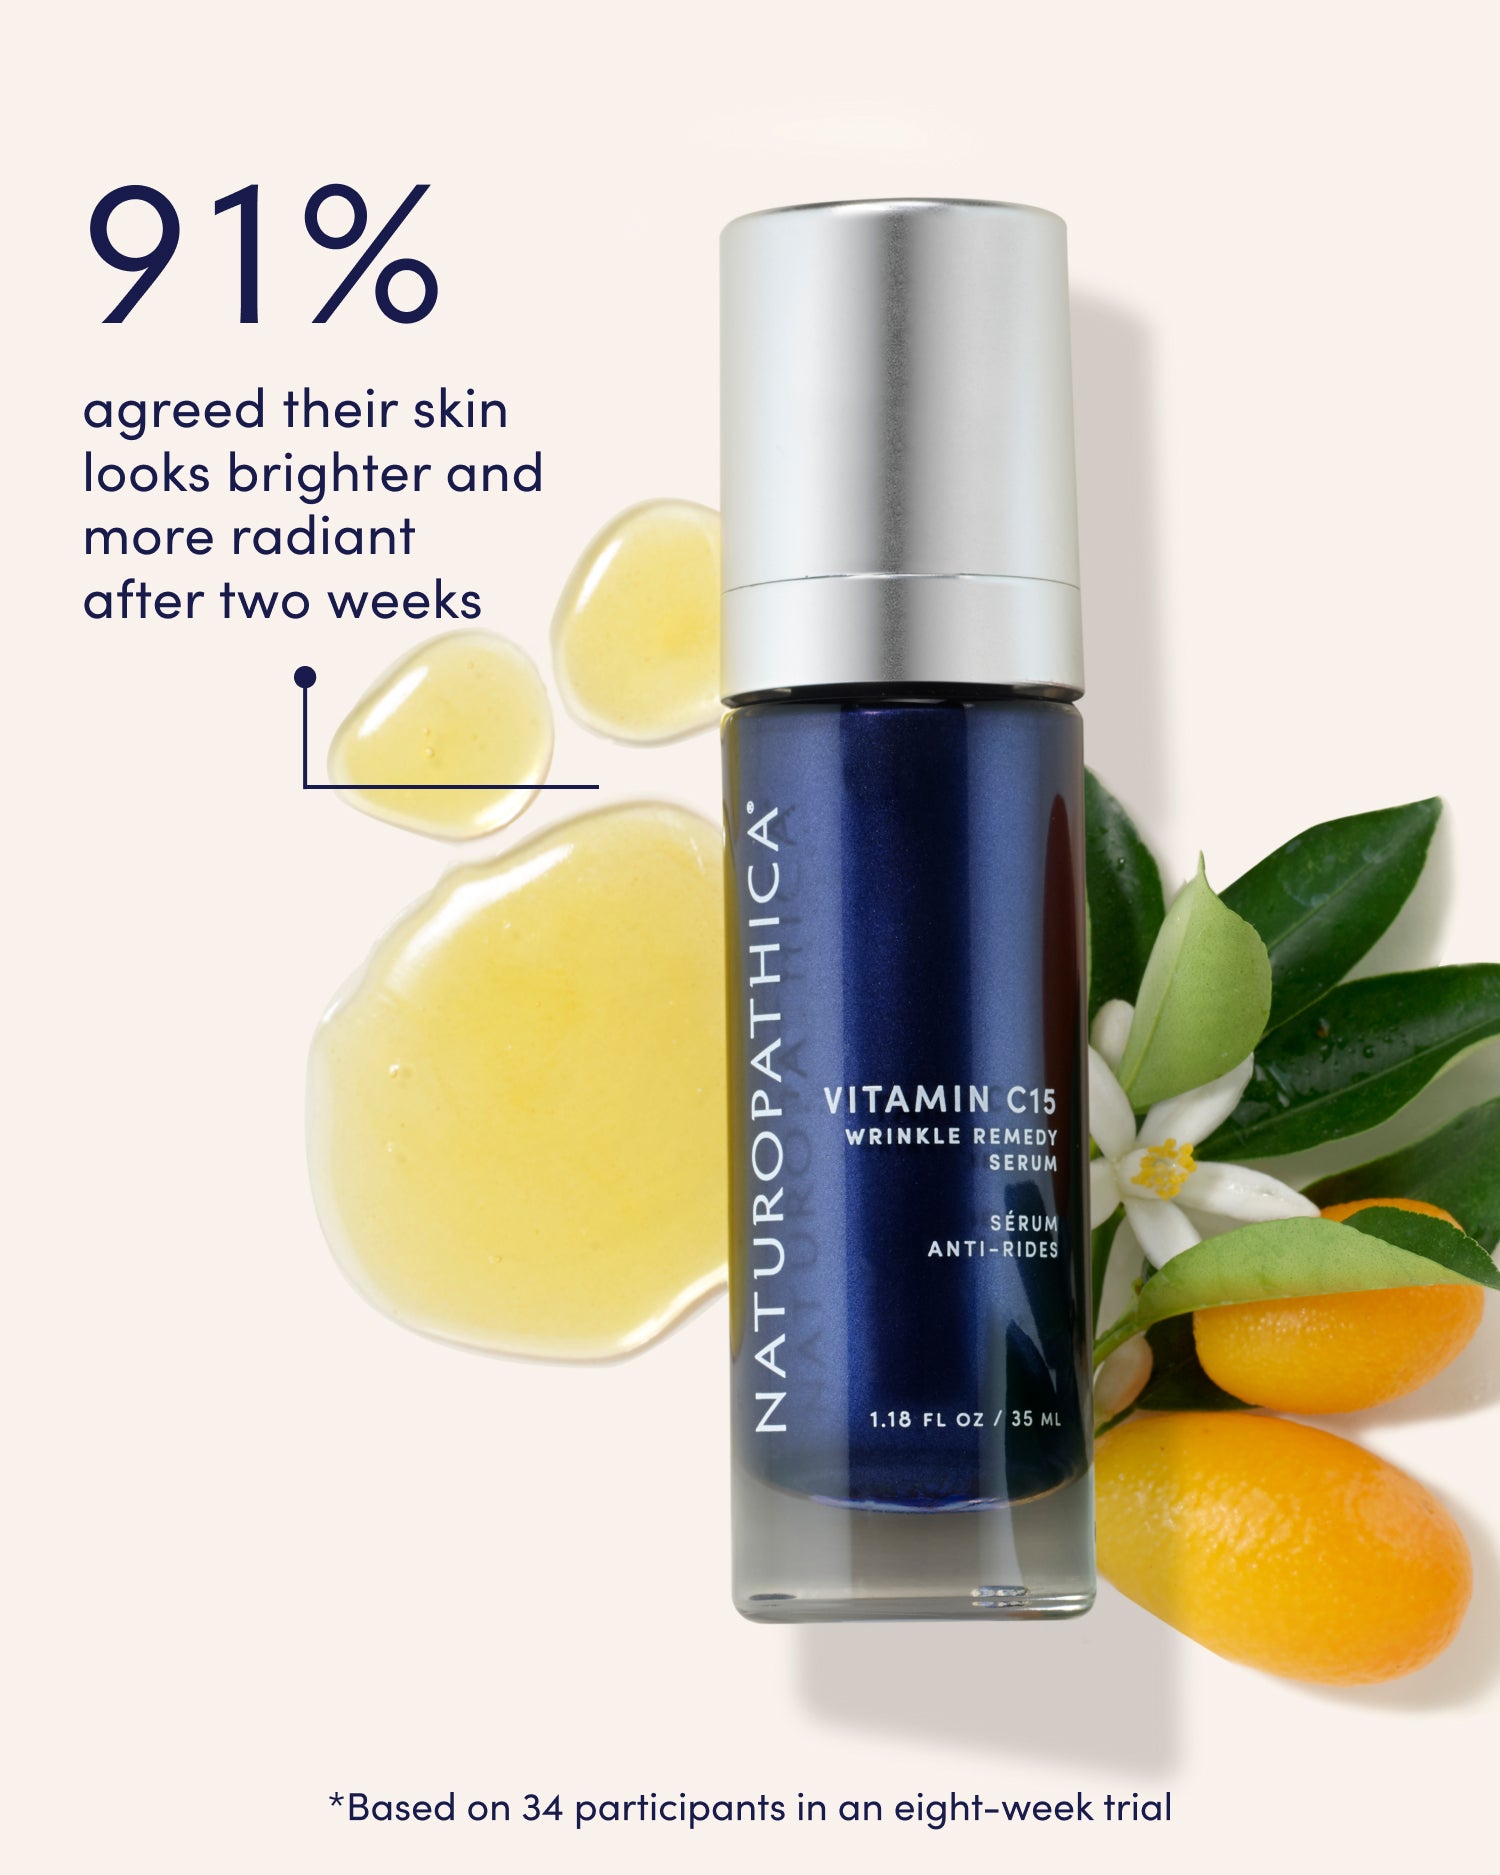 91% agreed their skin looks brighter and more radiant after two weeks